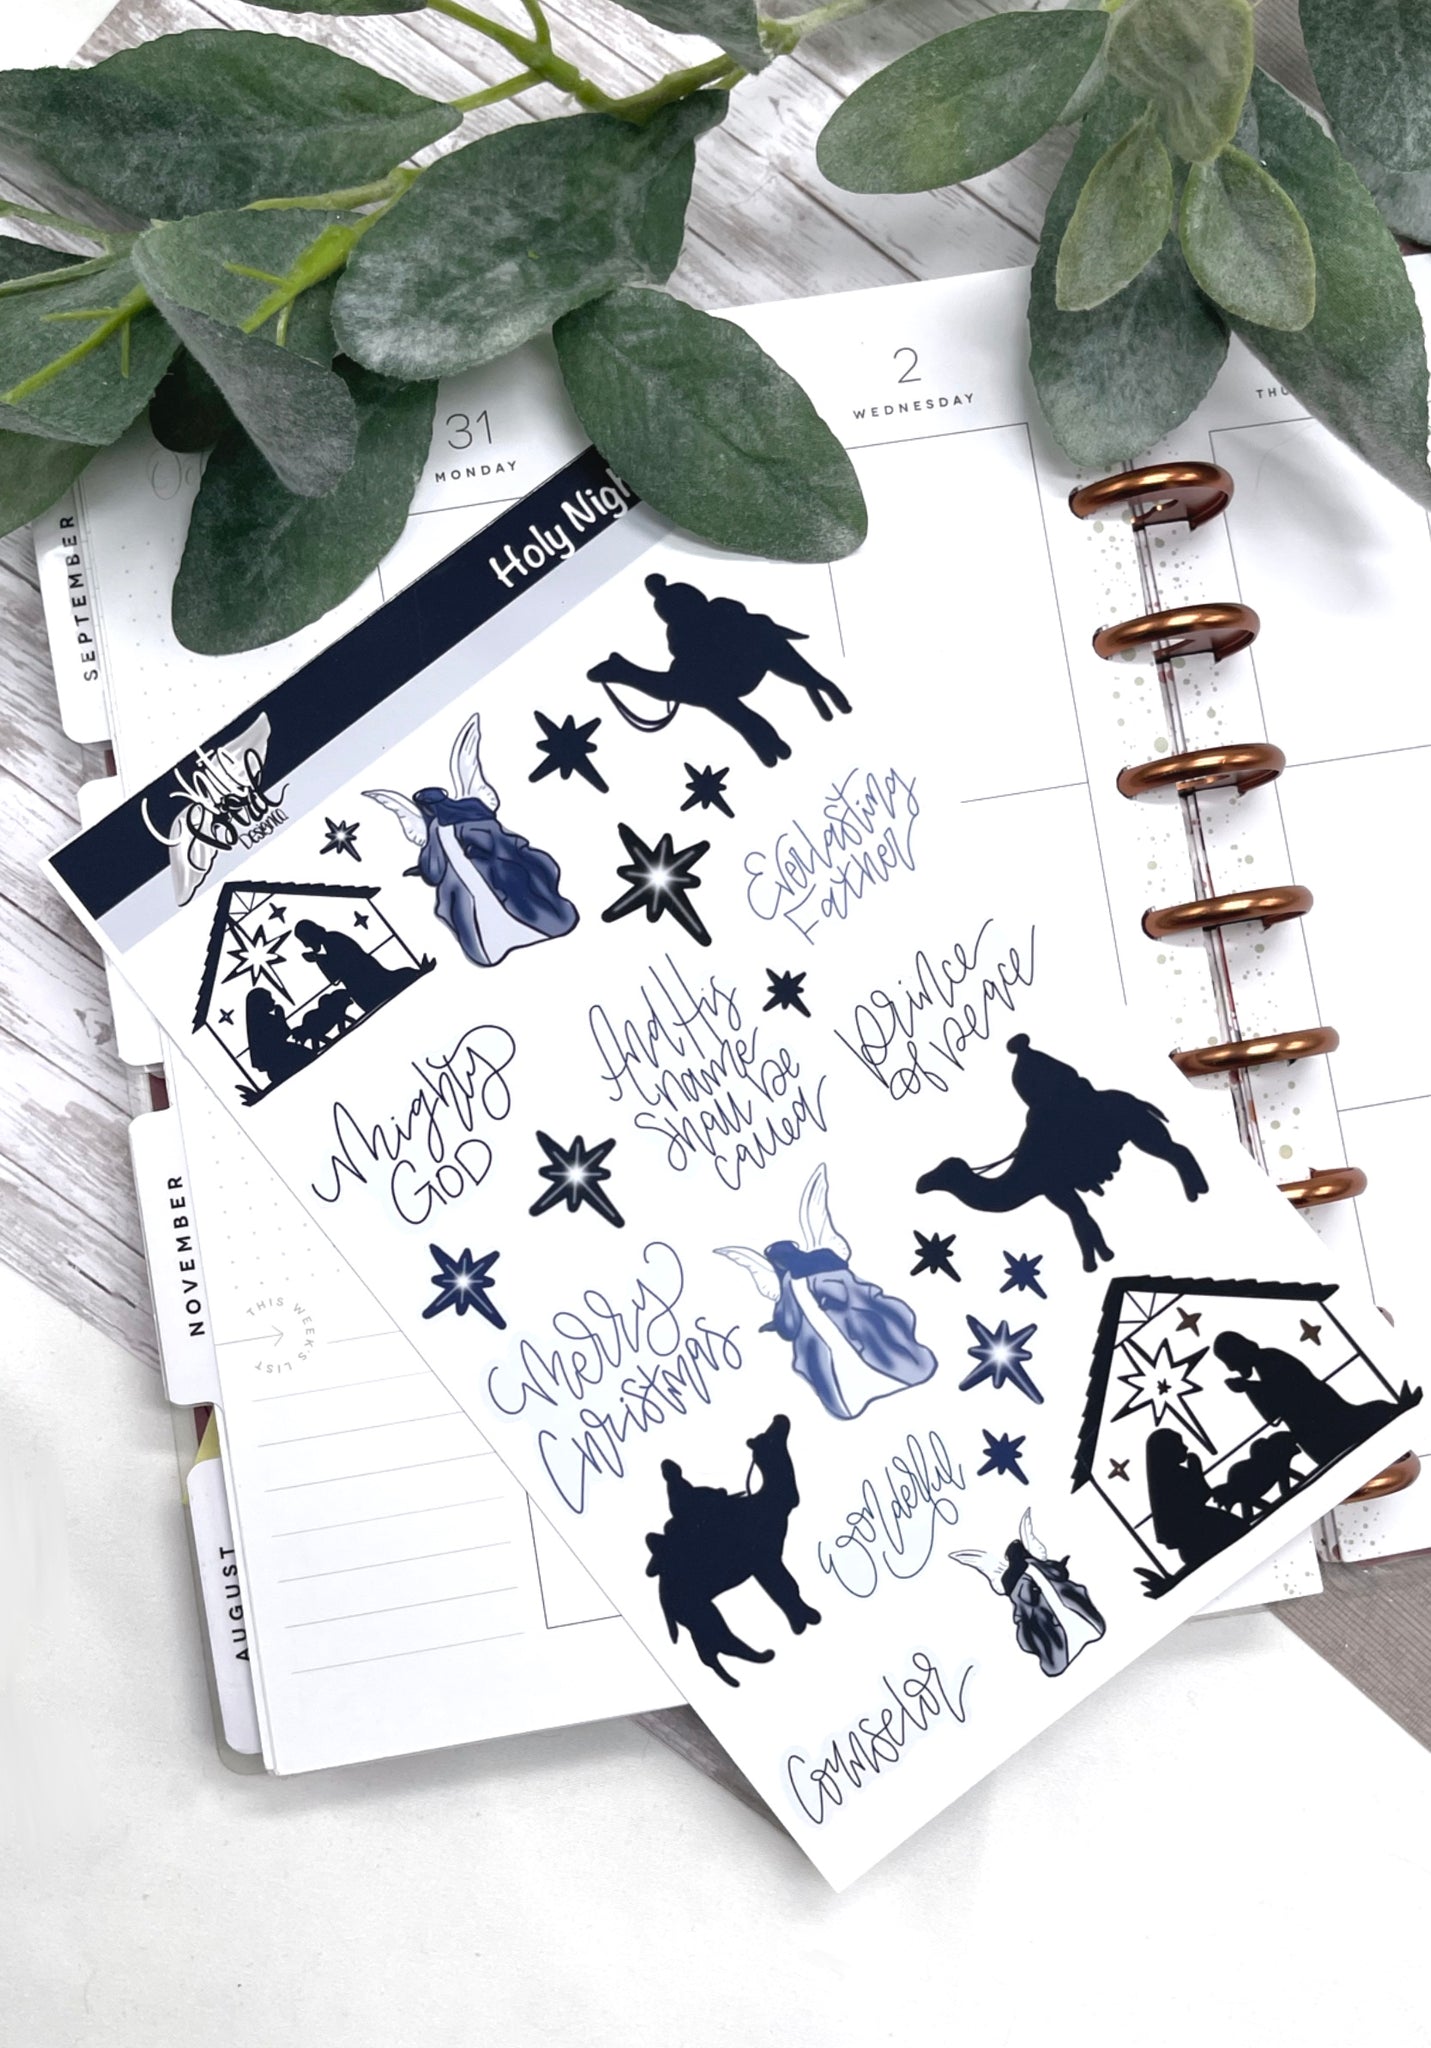 Stickers & Stationary - Christian Planner